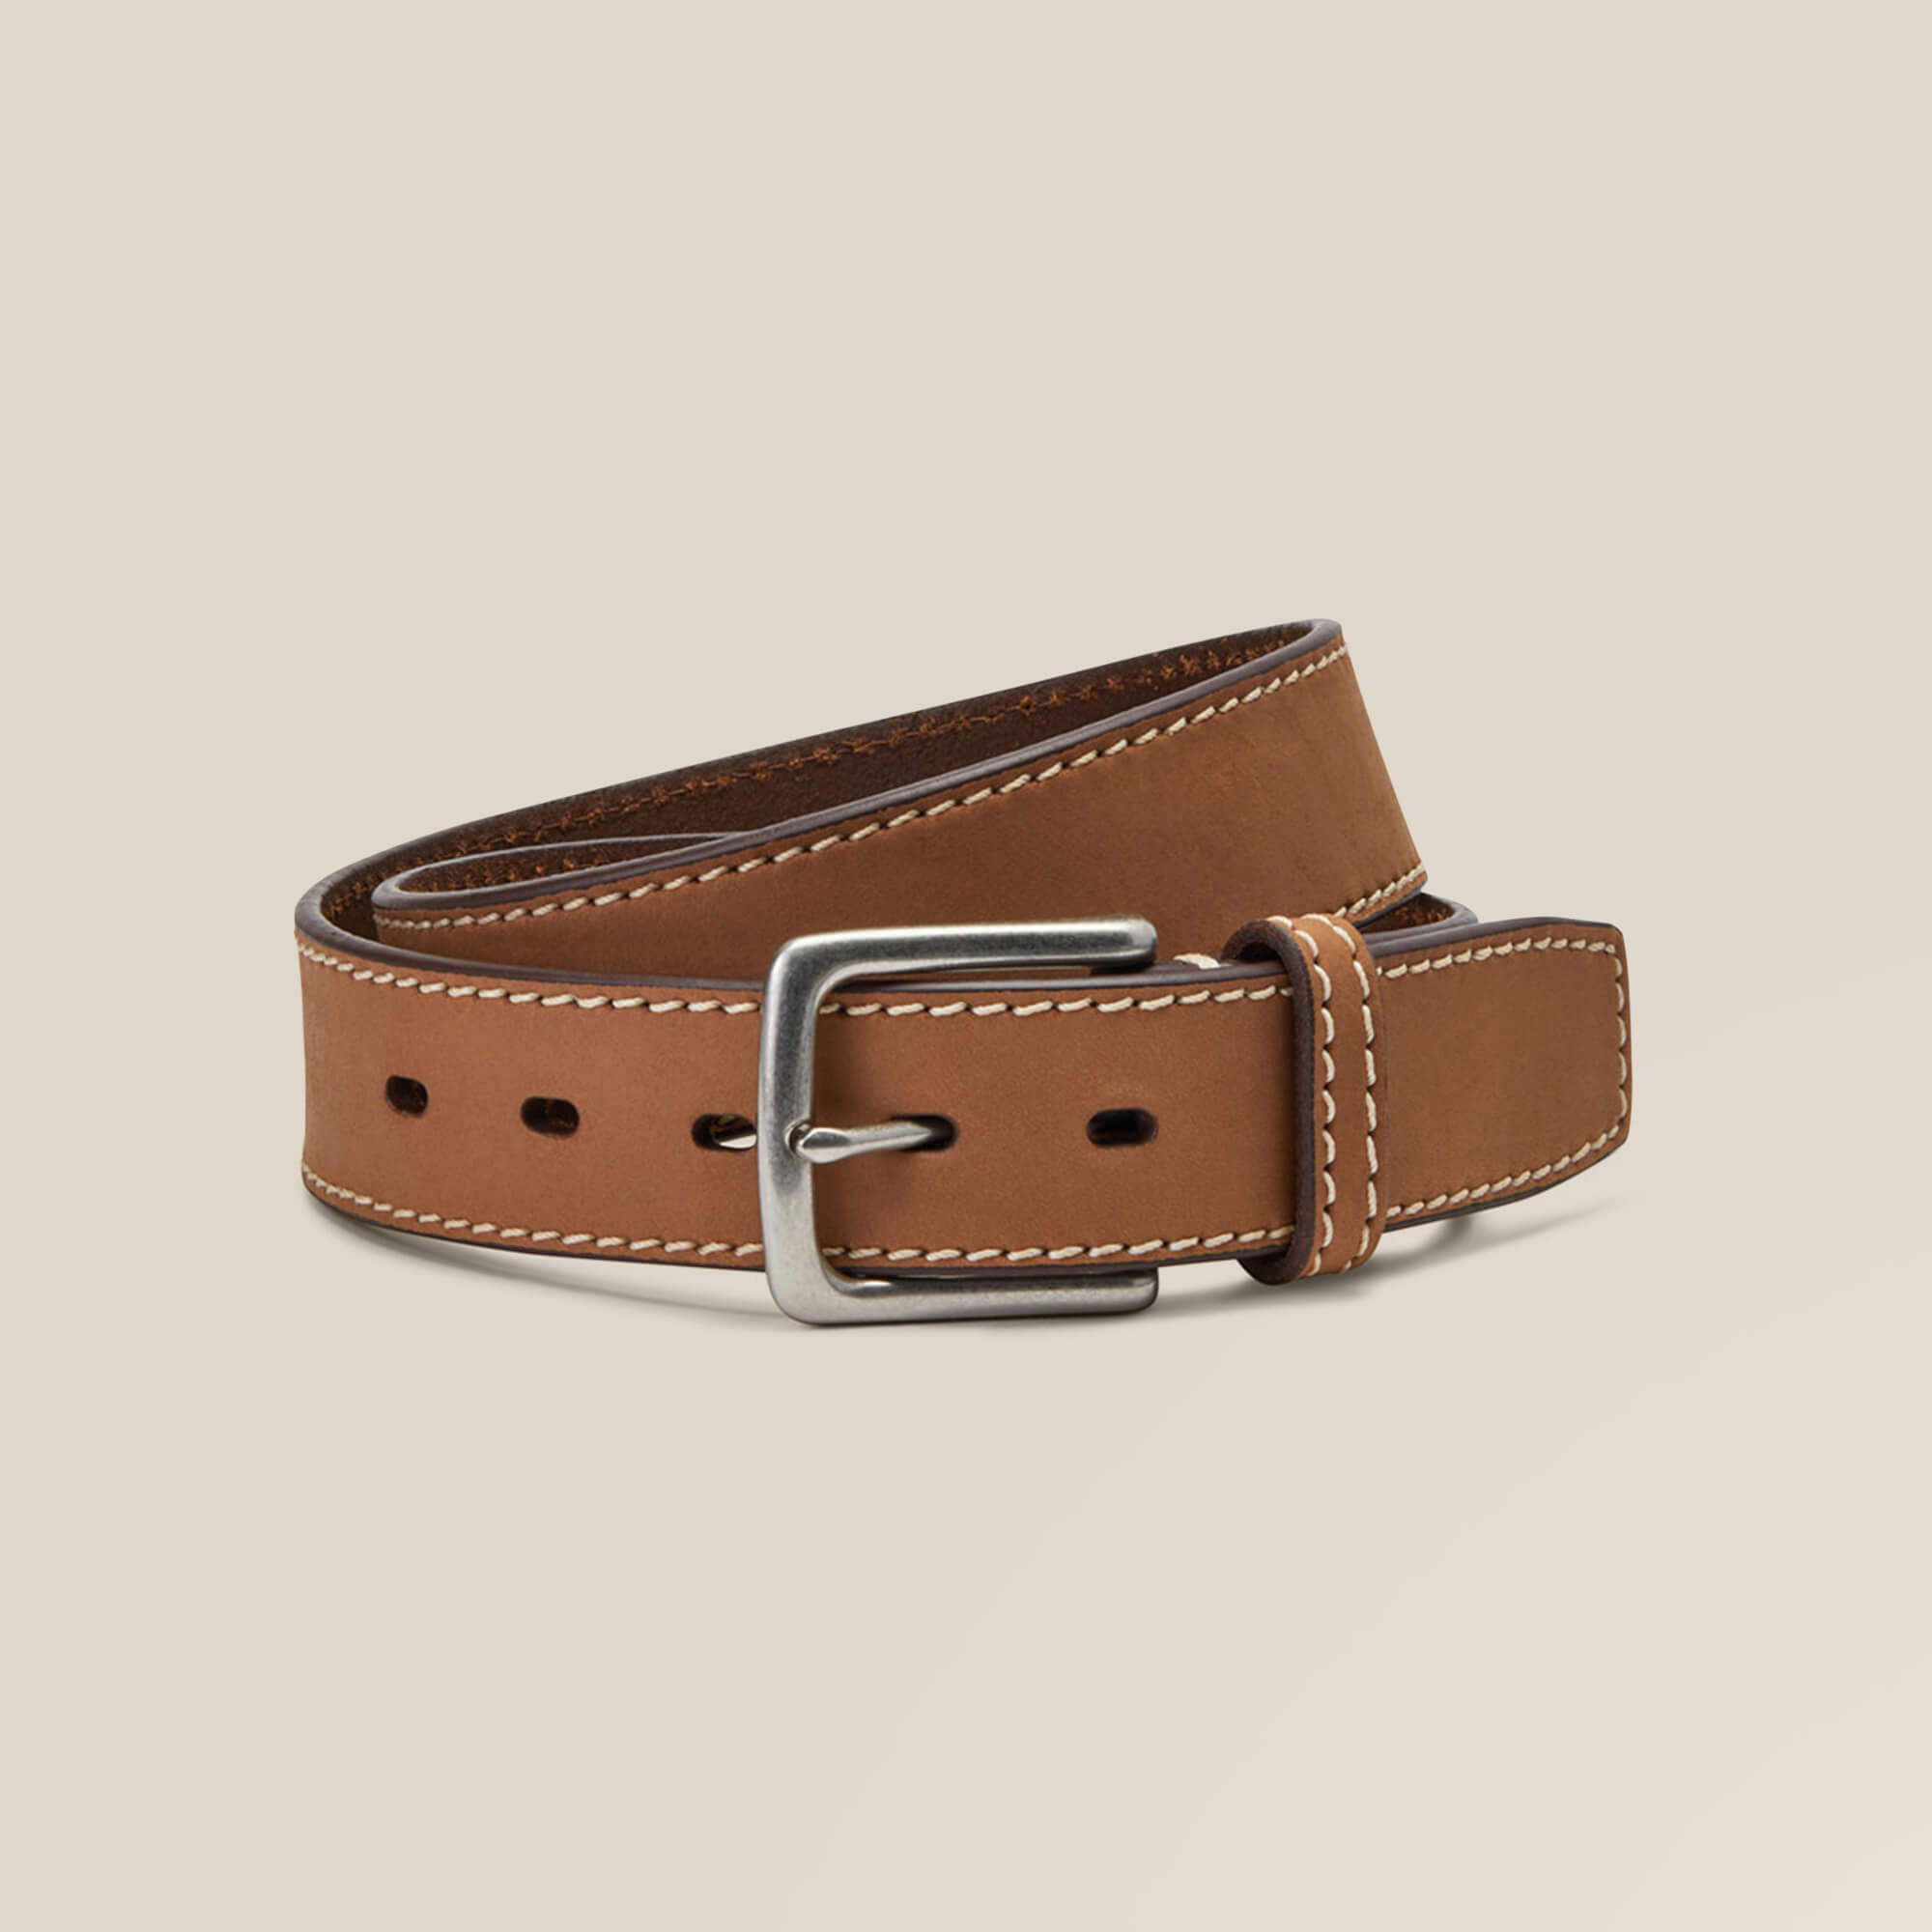 Simple Ariat Embroidery Belt | Ariat